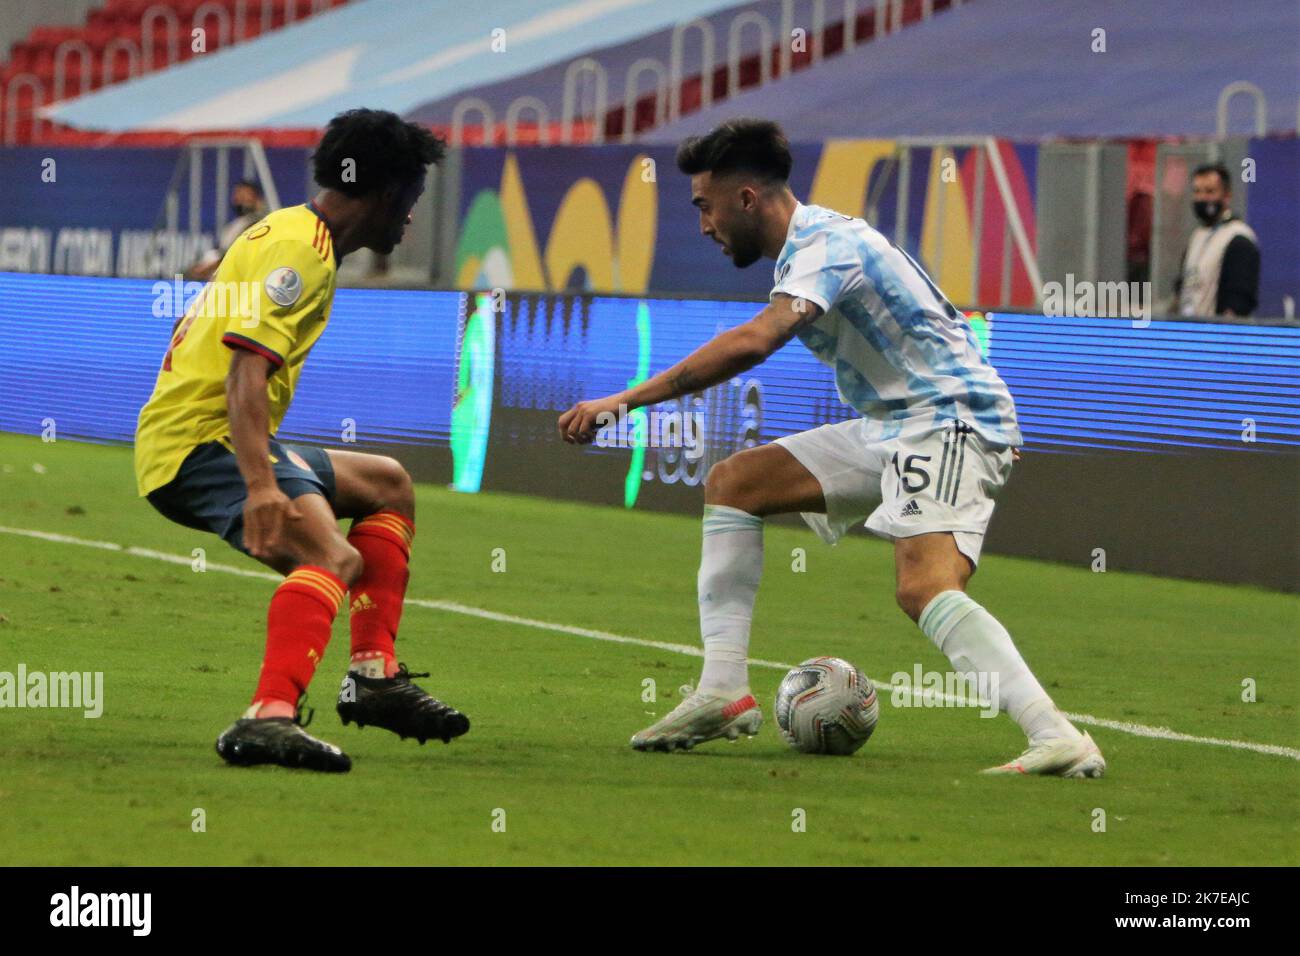 ©Laurent Lairys/MAXPPP - J Cuadrado of Colombia and N Gonzales of Argentina during the Copa America 2021, semi-final football match between Argentina and Colombia on July 6, 2021 at Estádio Nacional Mané Garrincha in Brasilia, Brazil photos Laurent Lairys /MAXPPP Stock Photo